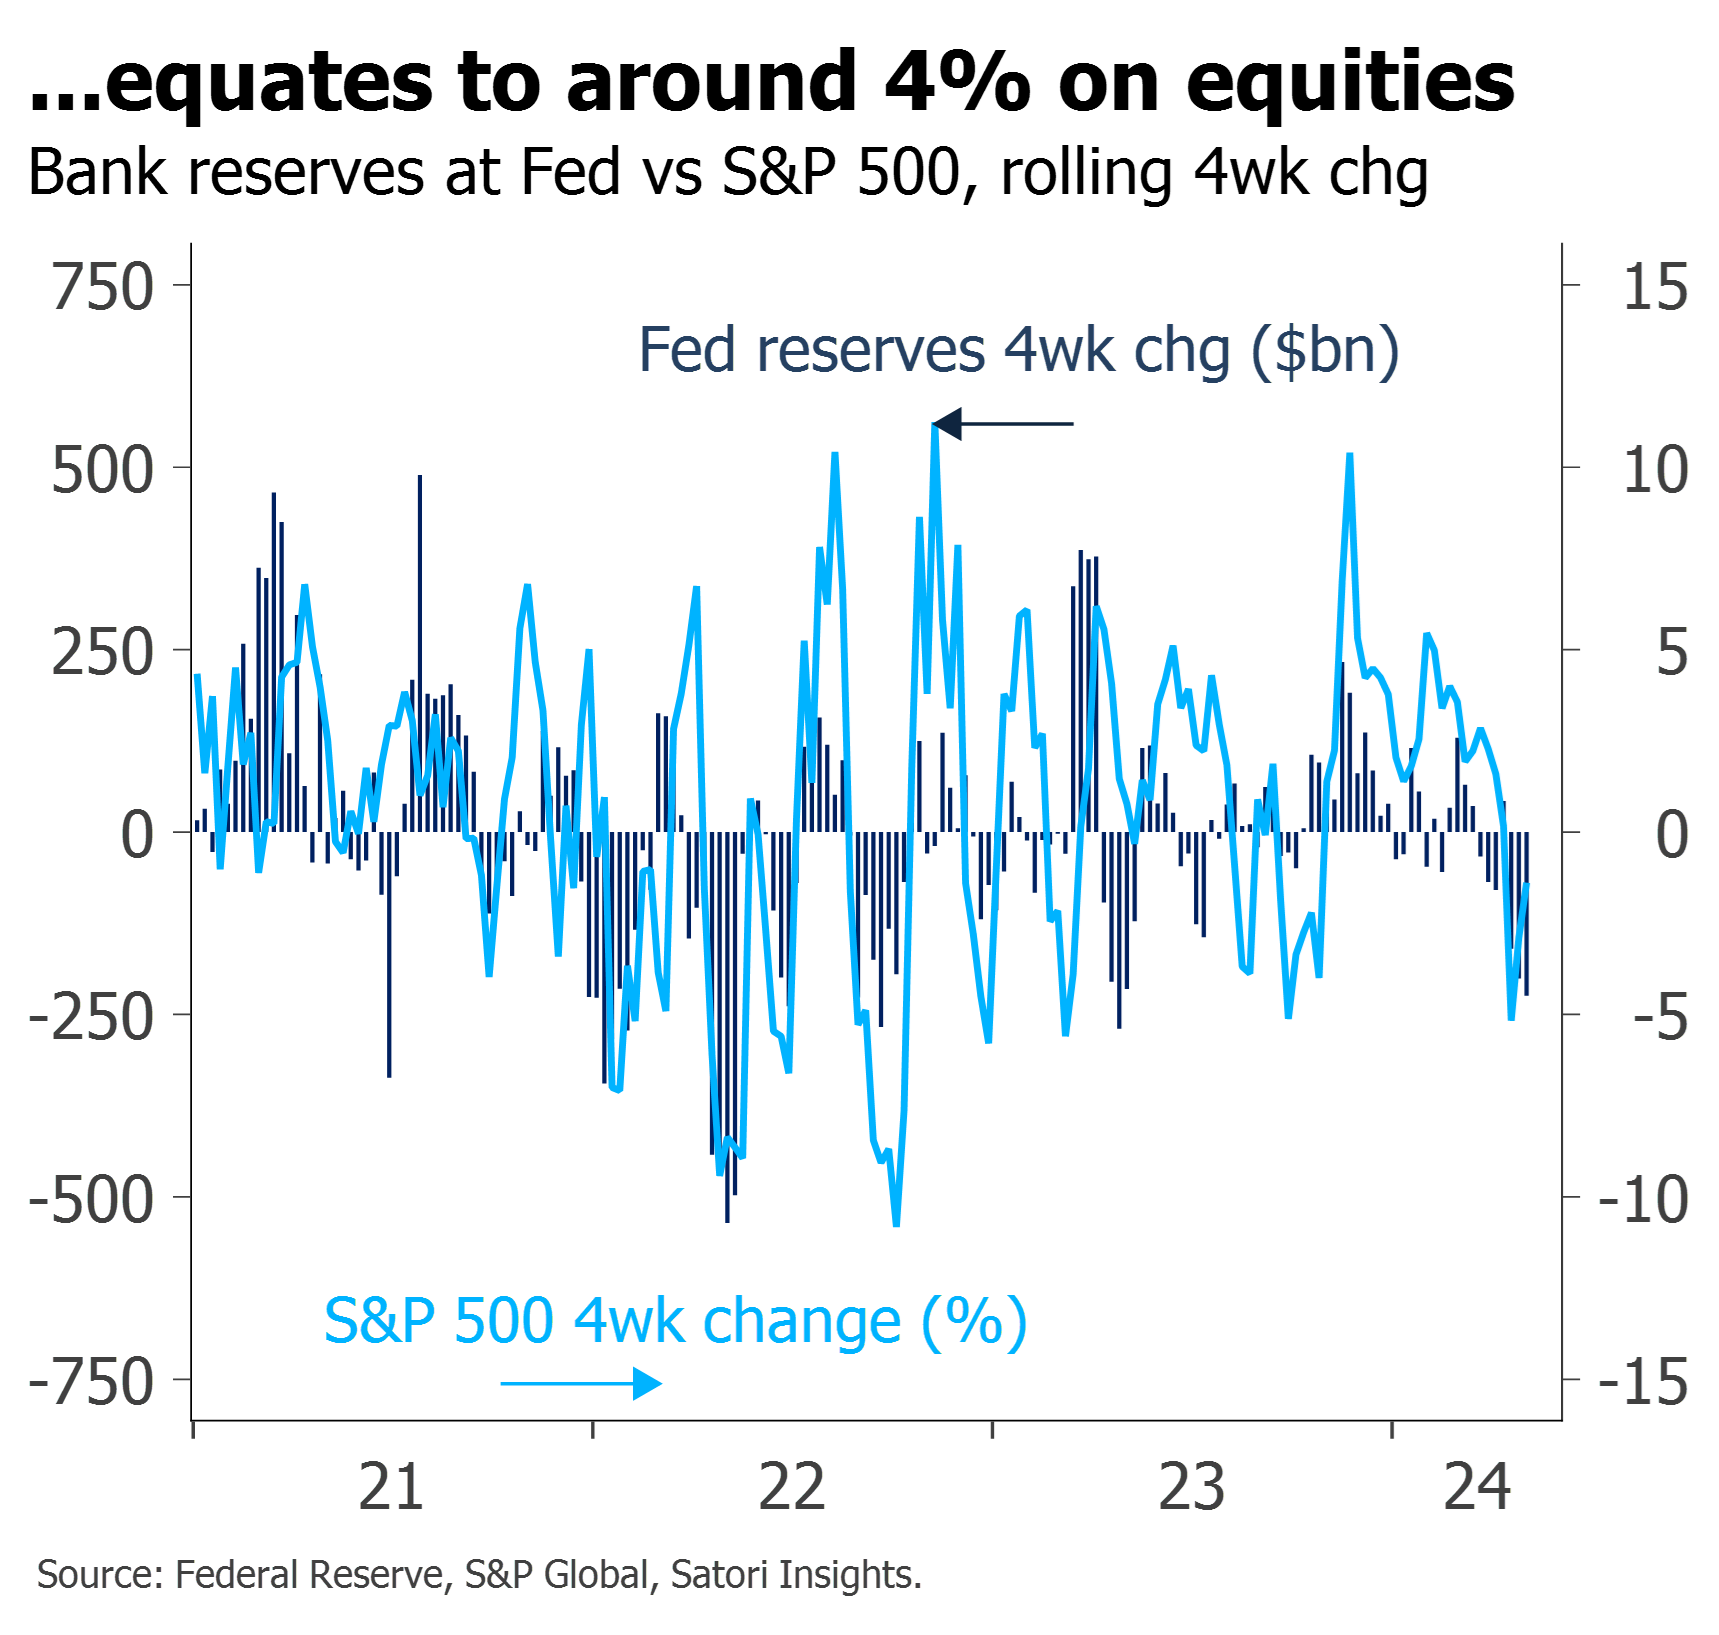 fed reserves changes correlating with spx